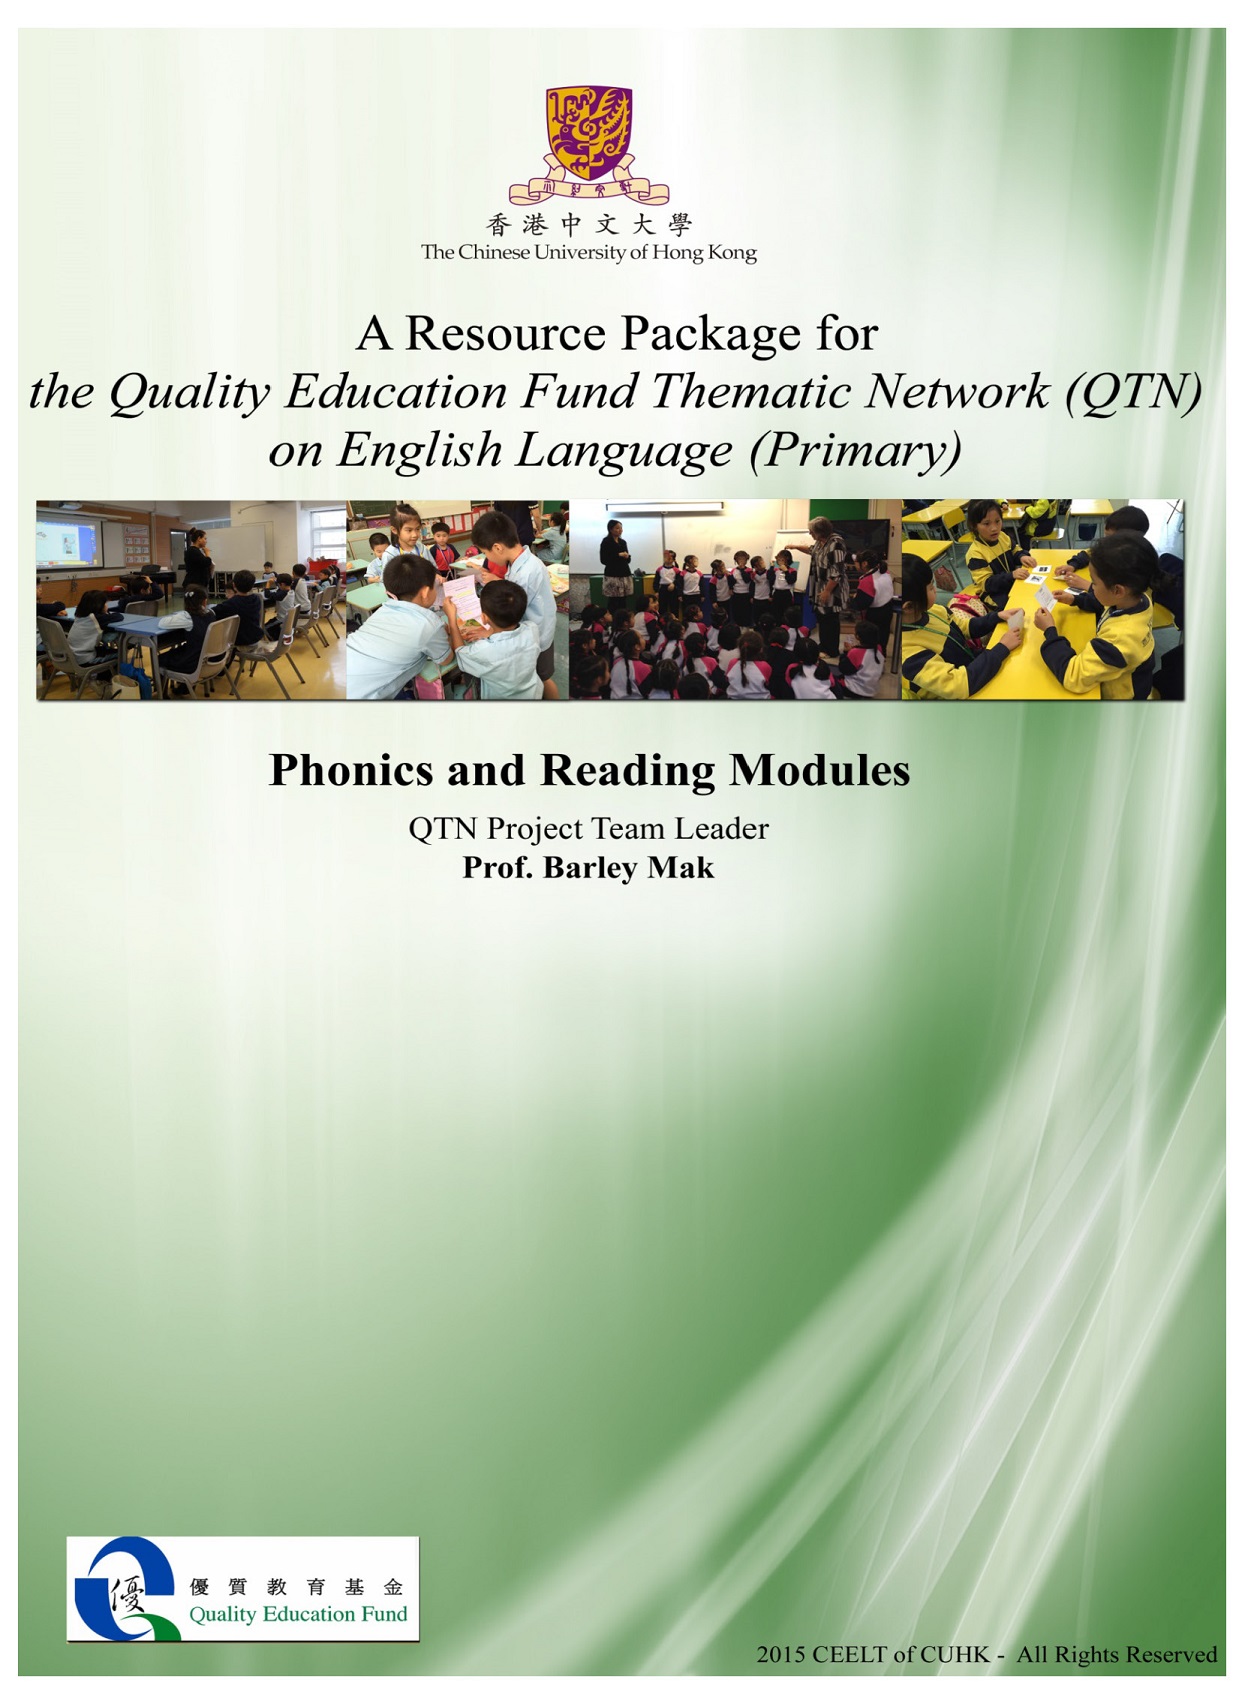 A Resource Package for Quality Education Fund - Thematic Network (QTN) on English Language (Primary): Phonics and Reading Modules